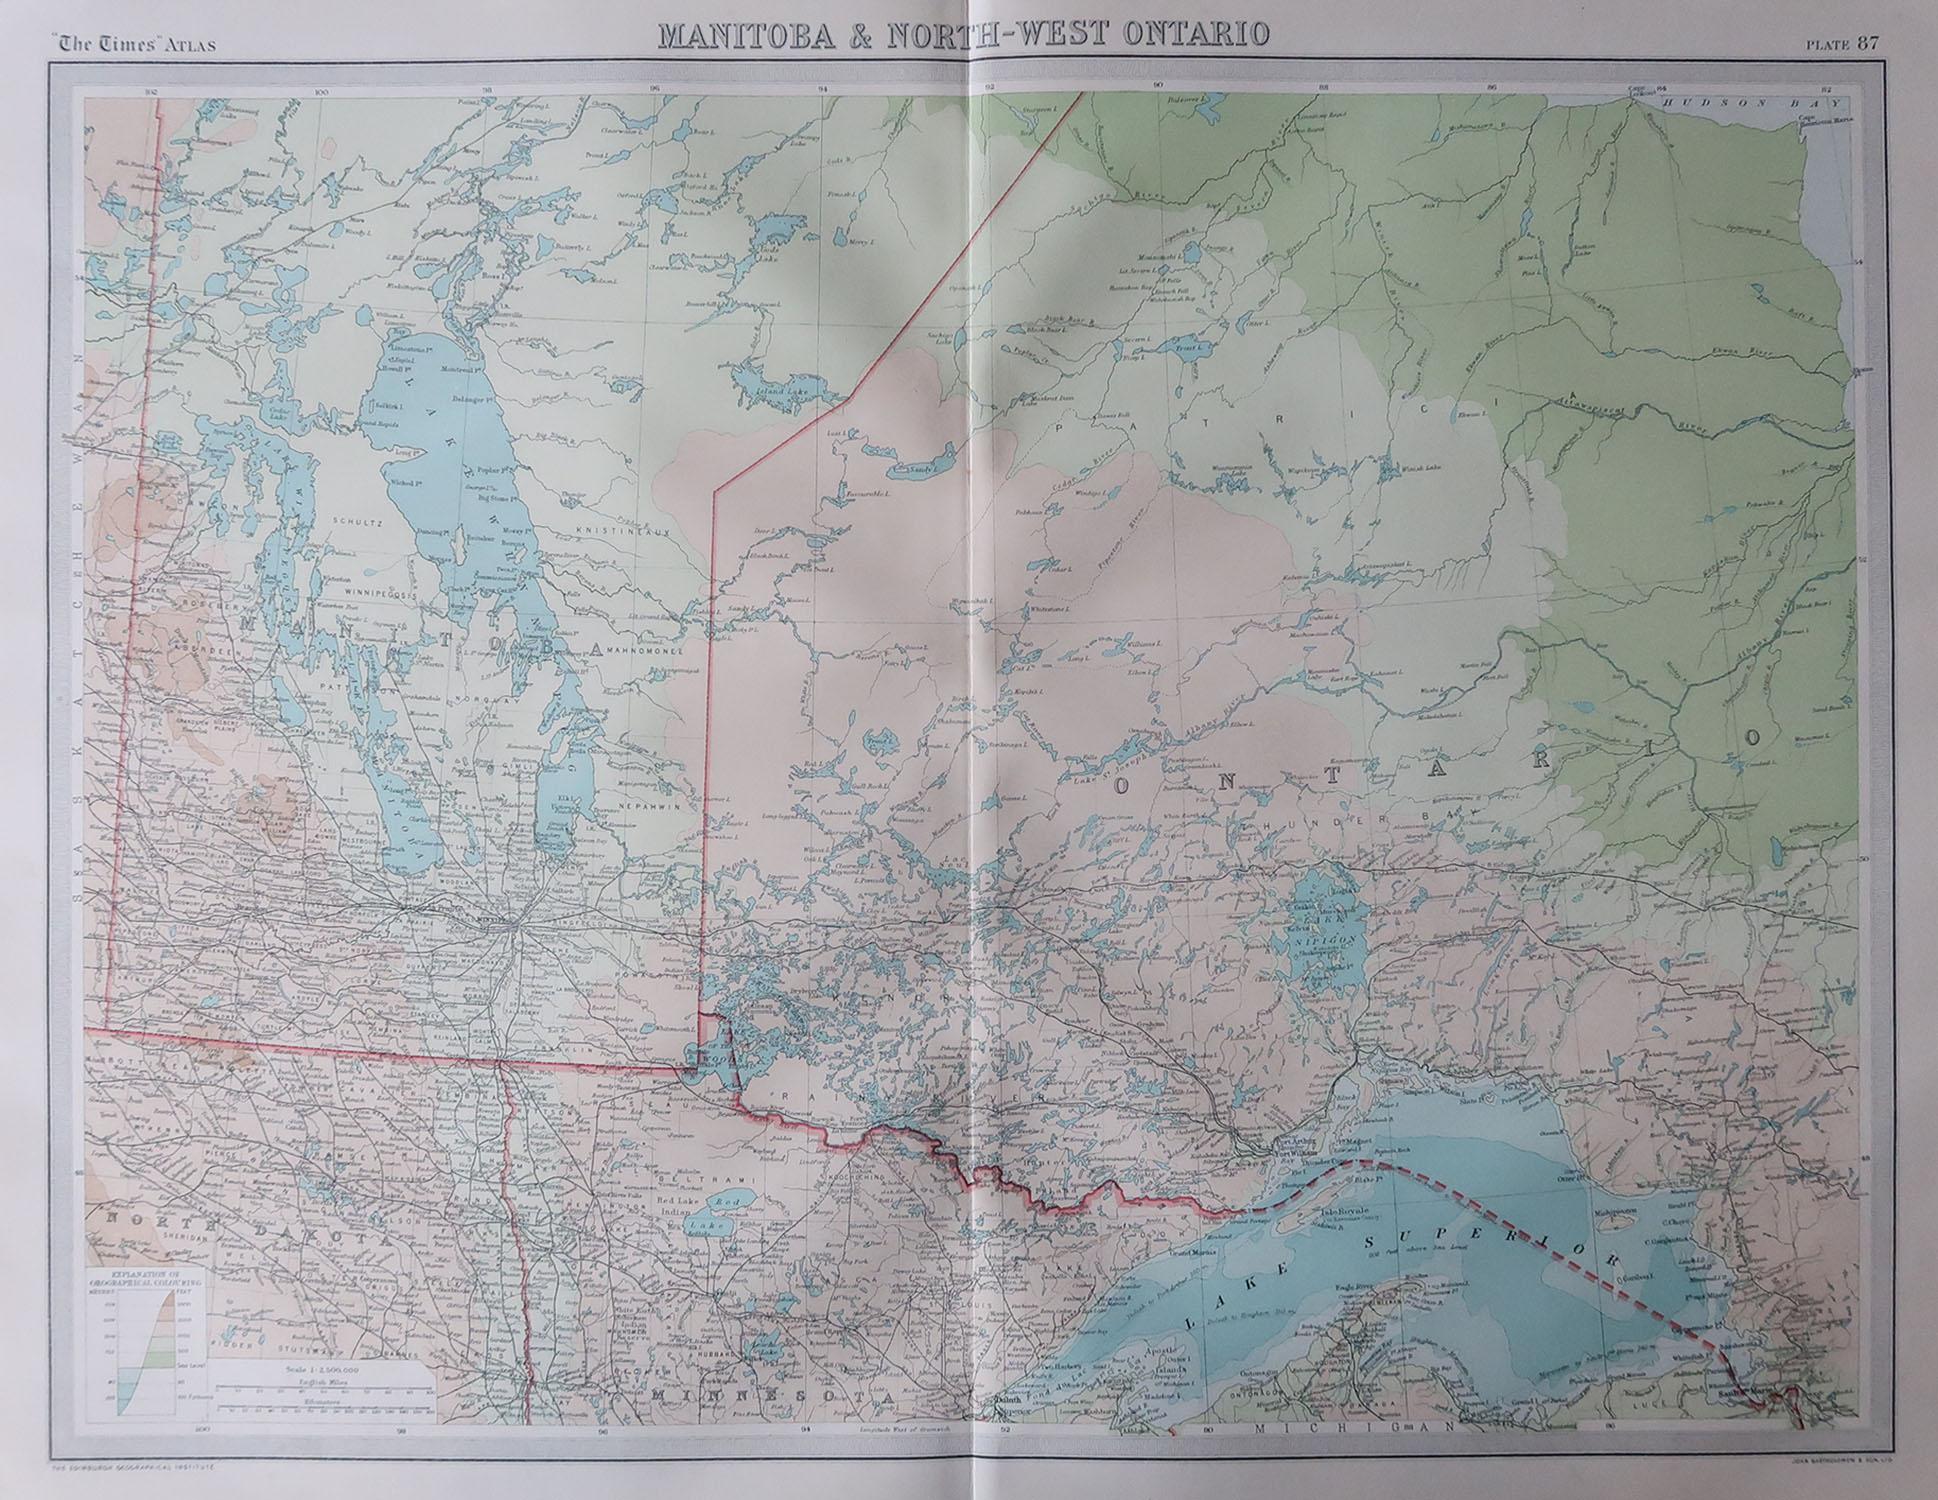 Great map of Manitoba and part of Ontario

Unframed

Original color

By John Bartholomew and Co. Edinburgh Geographical Institute

Published, circa 1920

Free shipping.
   